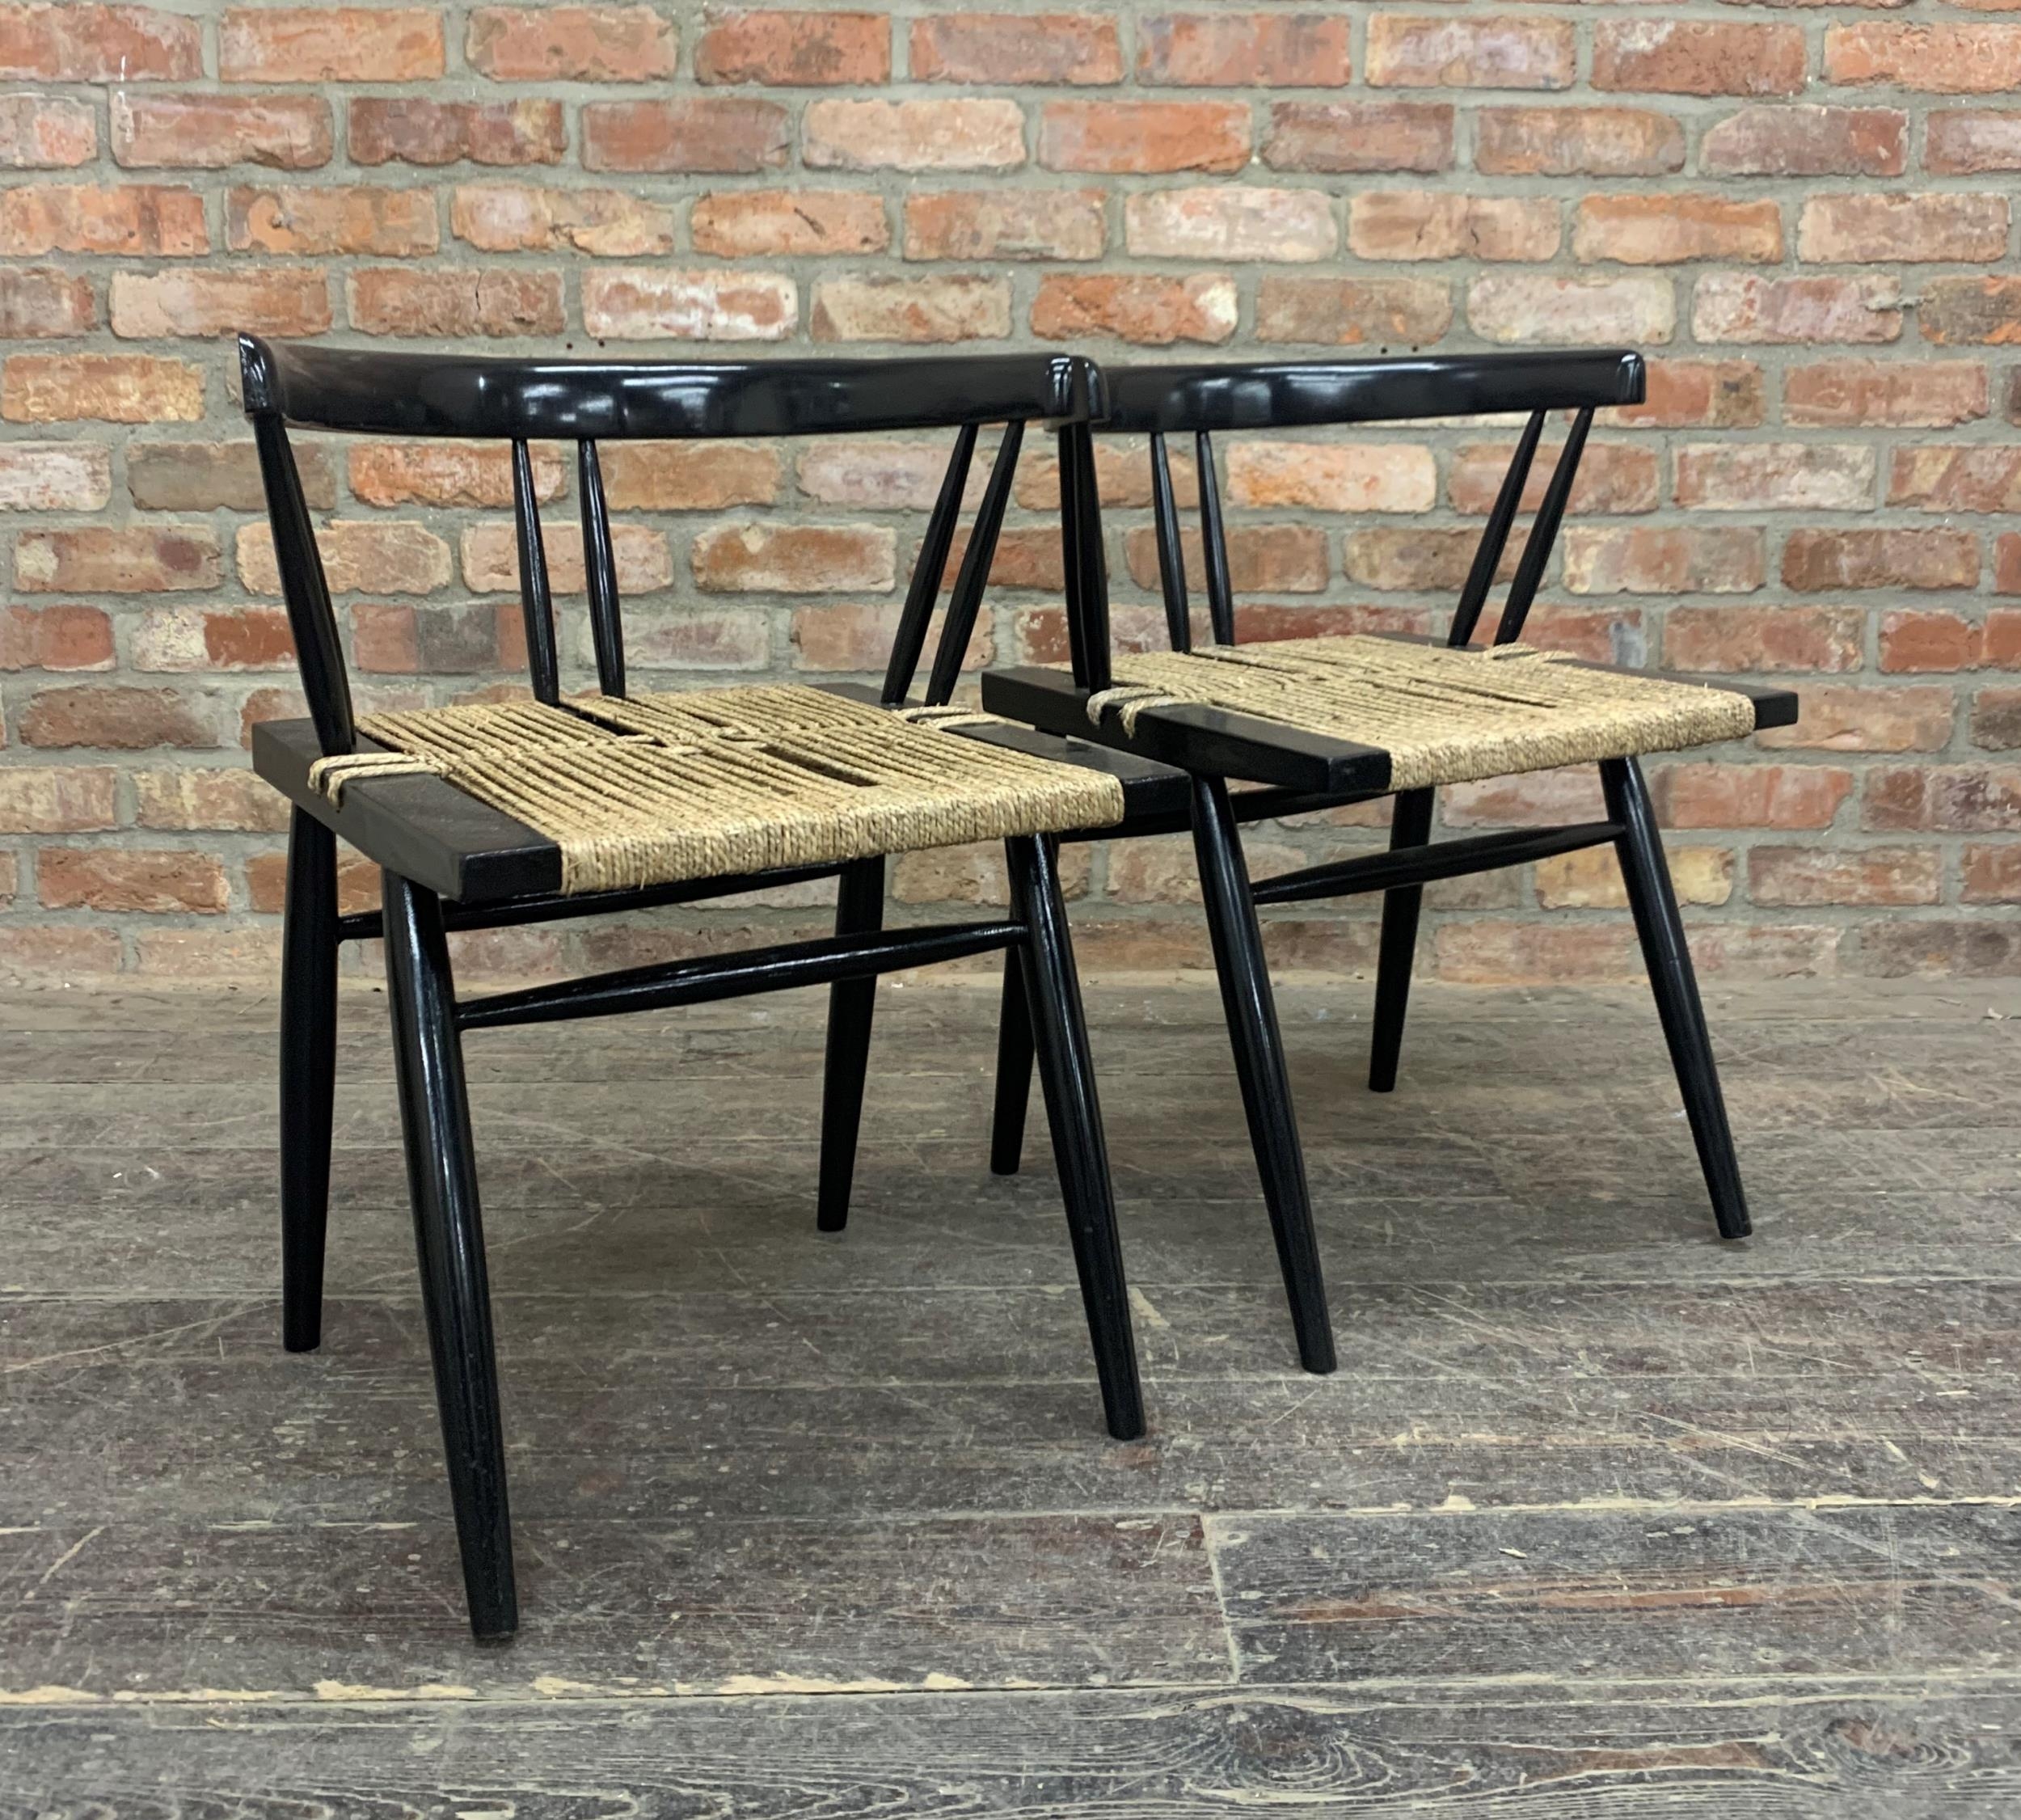 George Nakashima (1905-1990, American), "Ahmedabad" pair of chairs ebonised frames with woven